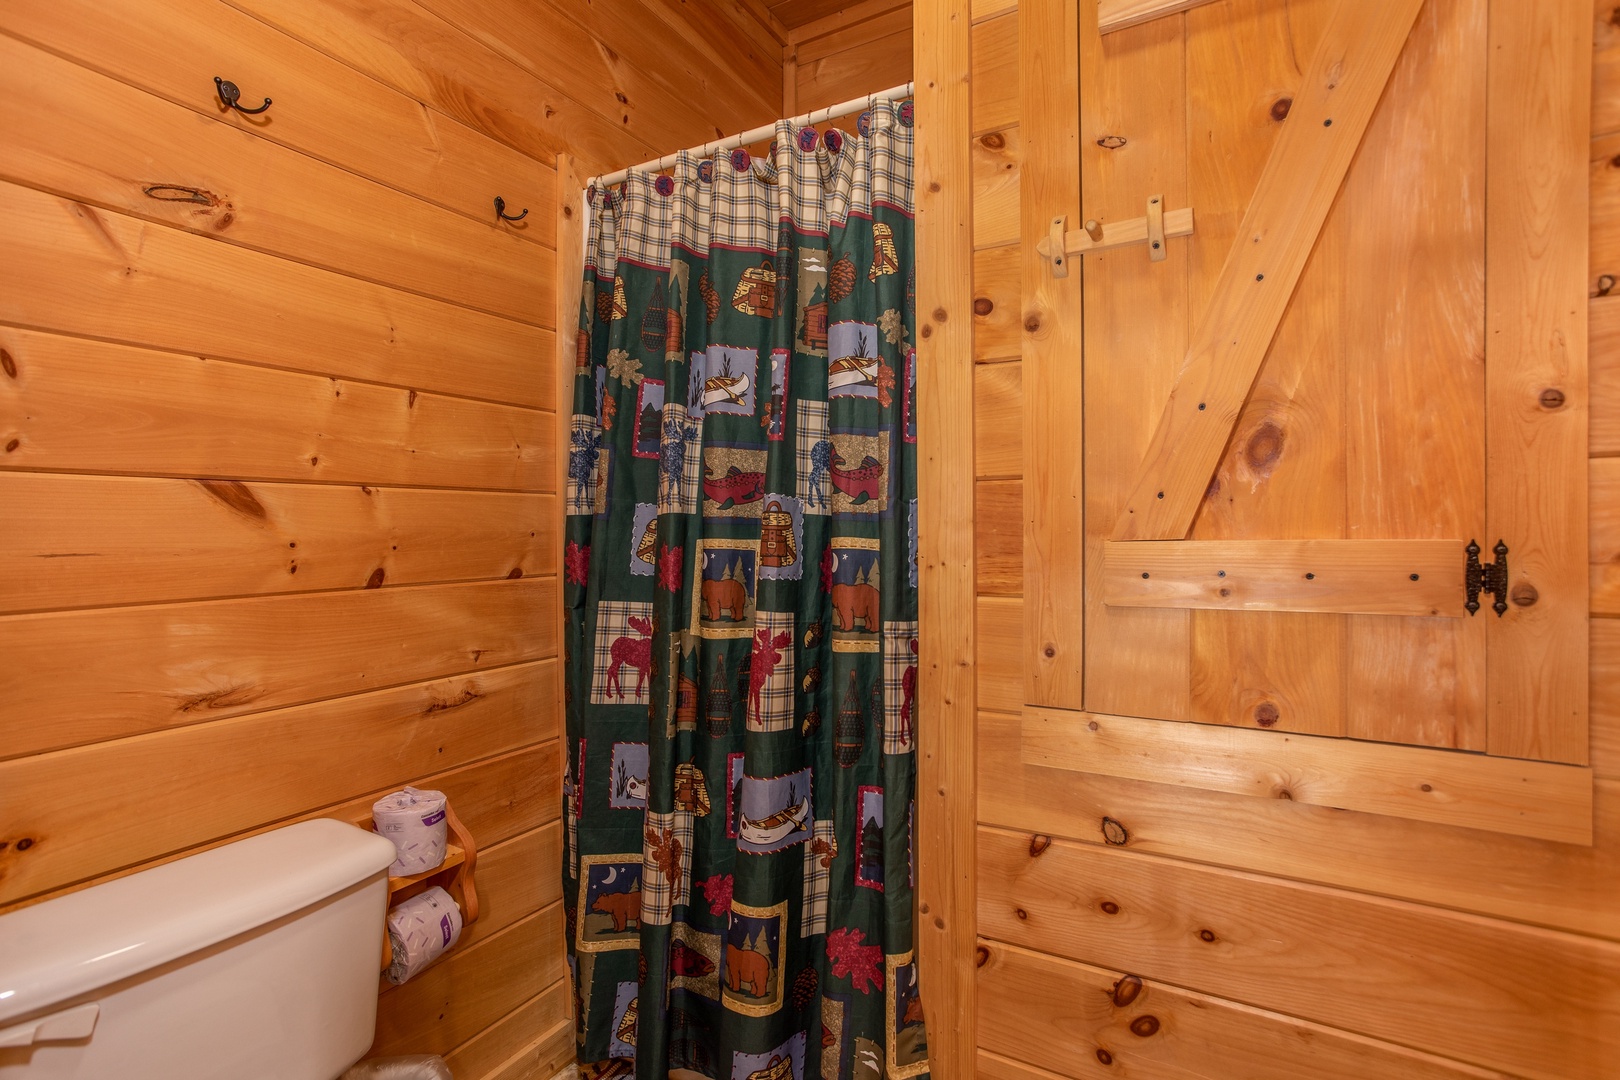 Bathroom with a separate shower at Bearly in the Mountains, a 5-bedroom cabin rental located in Pigeon Forge